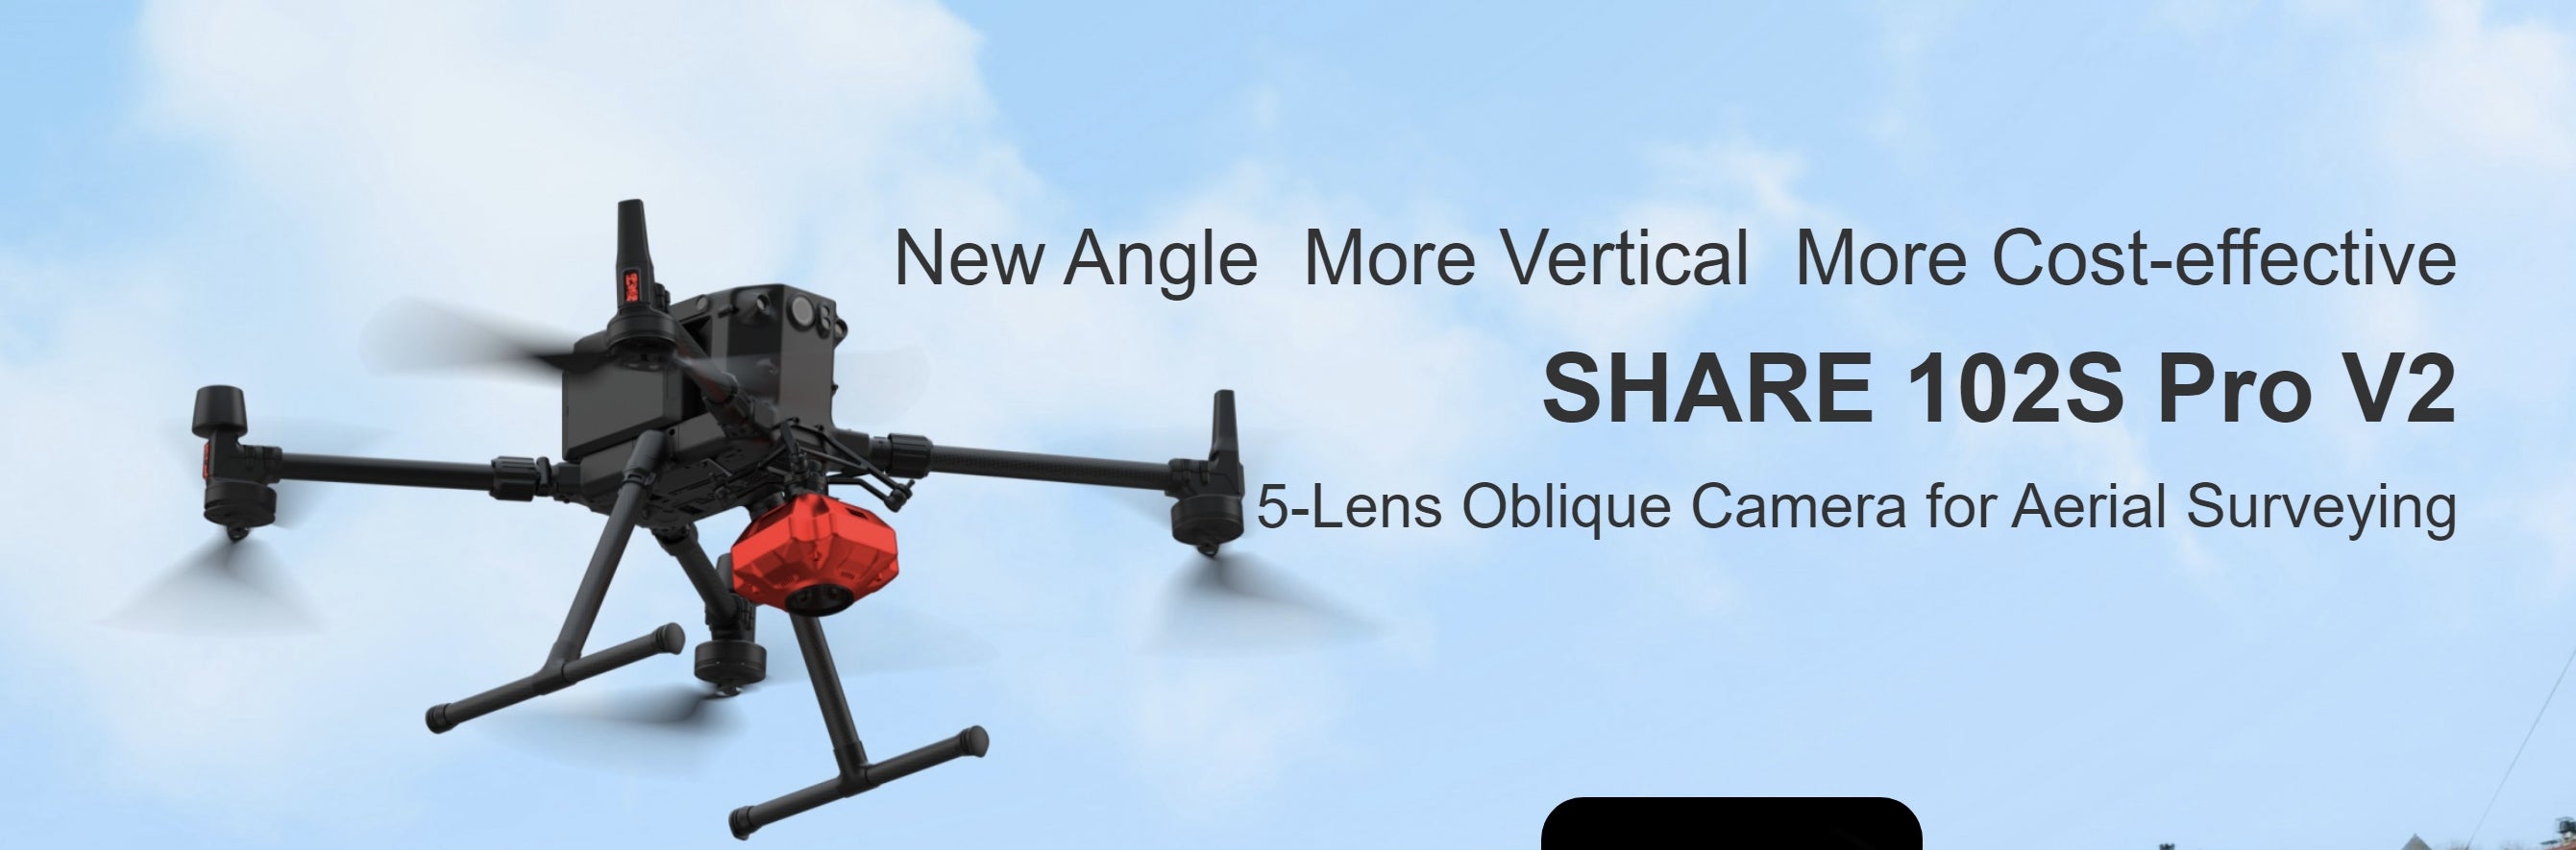 SHARE 102S Pro V2, Cost-effective, high-angle camera for aerial surveying and mapping.